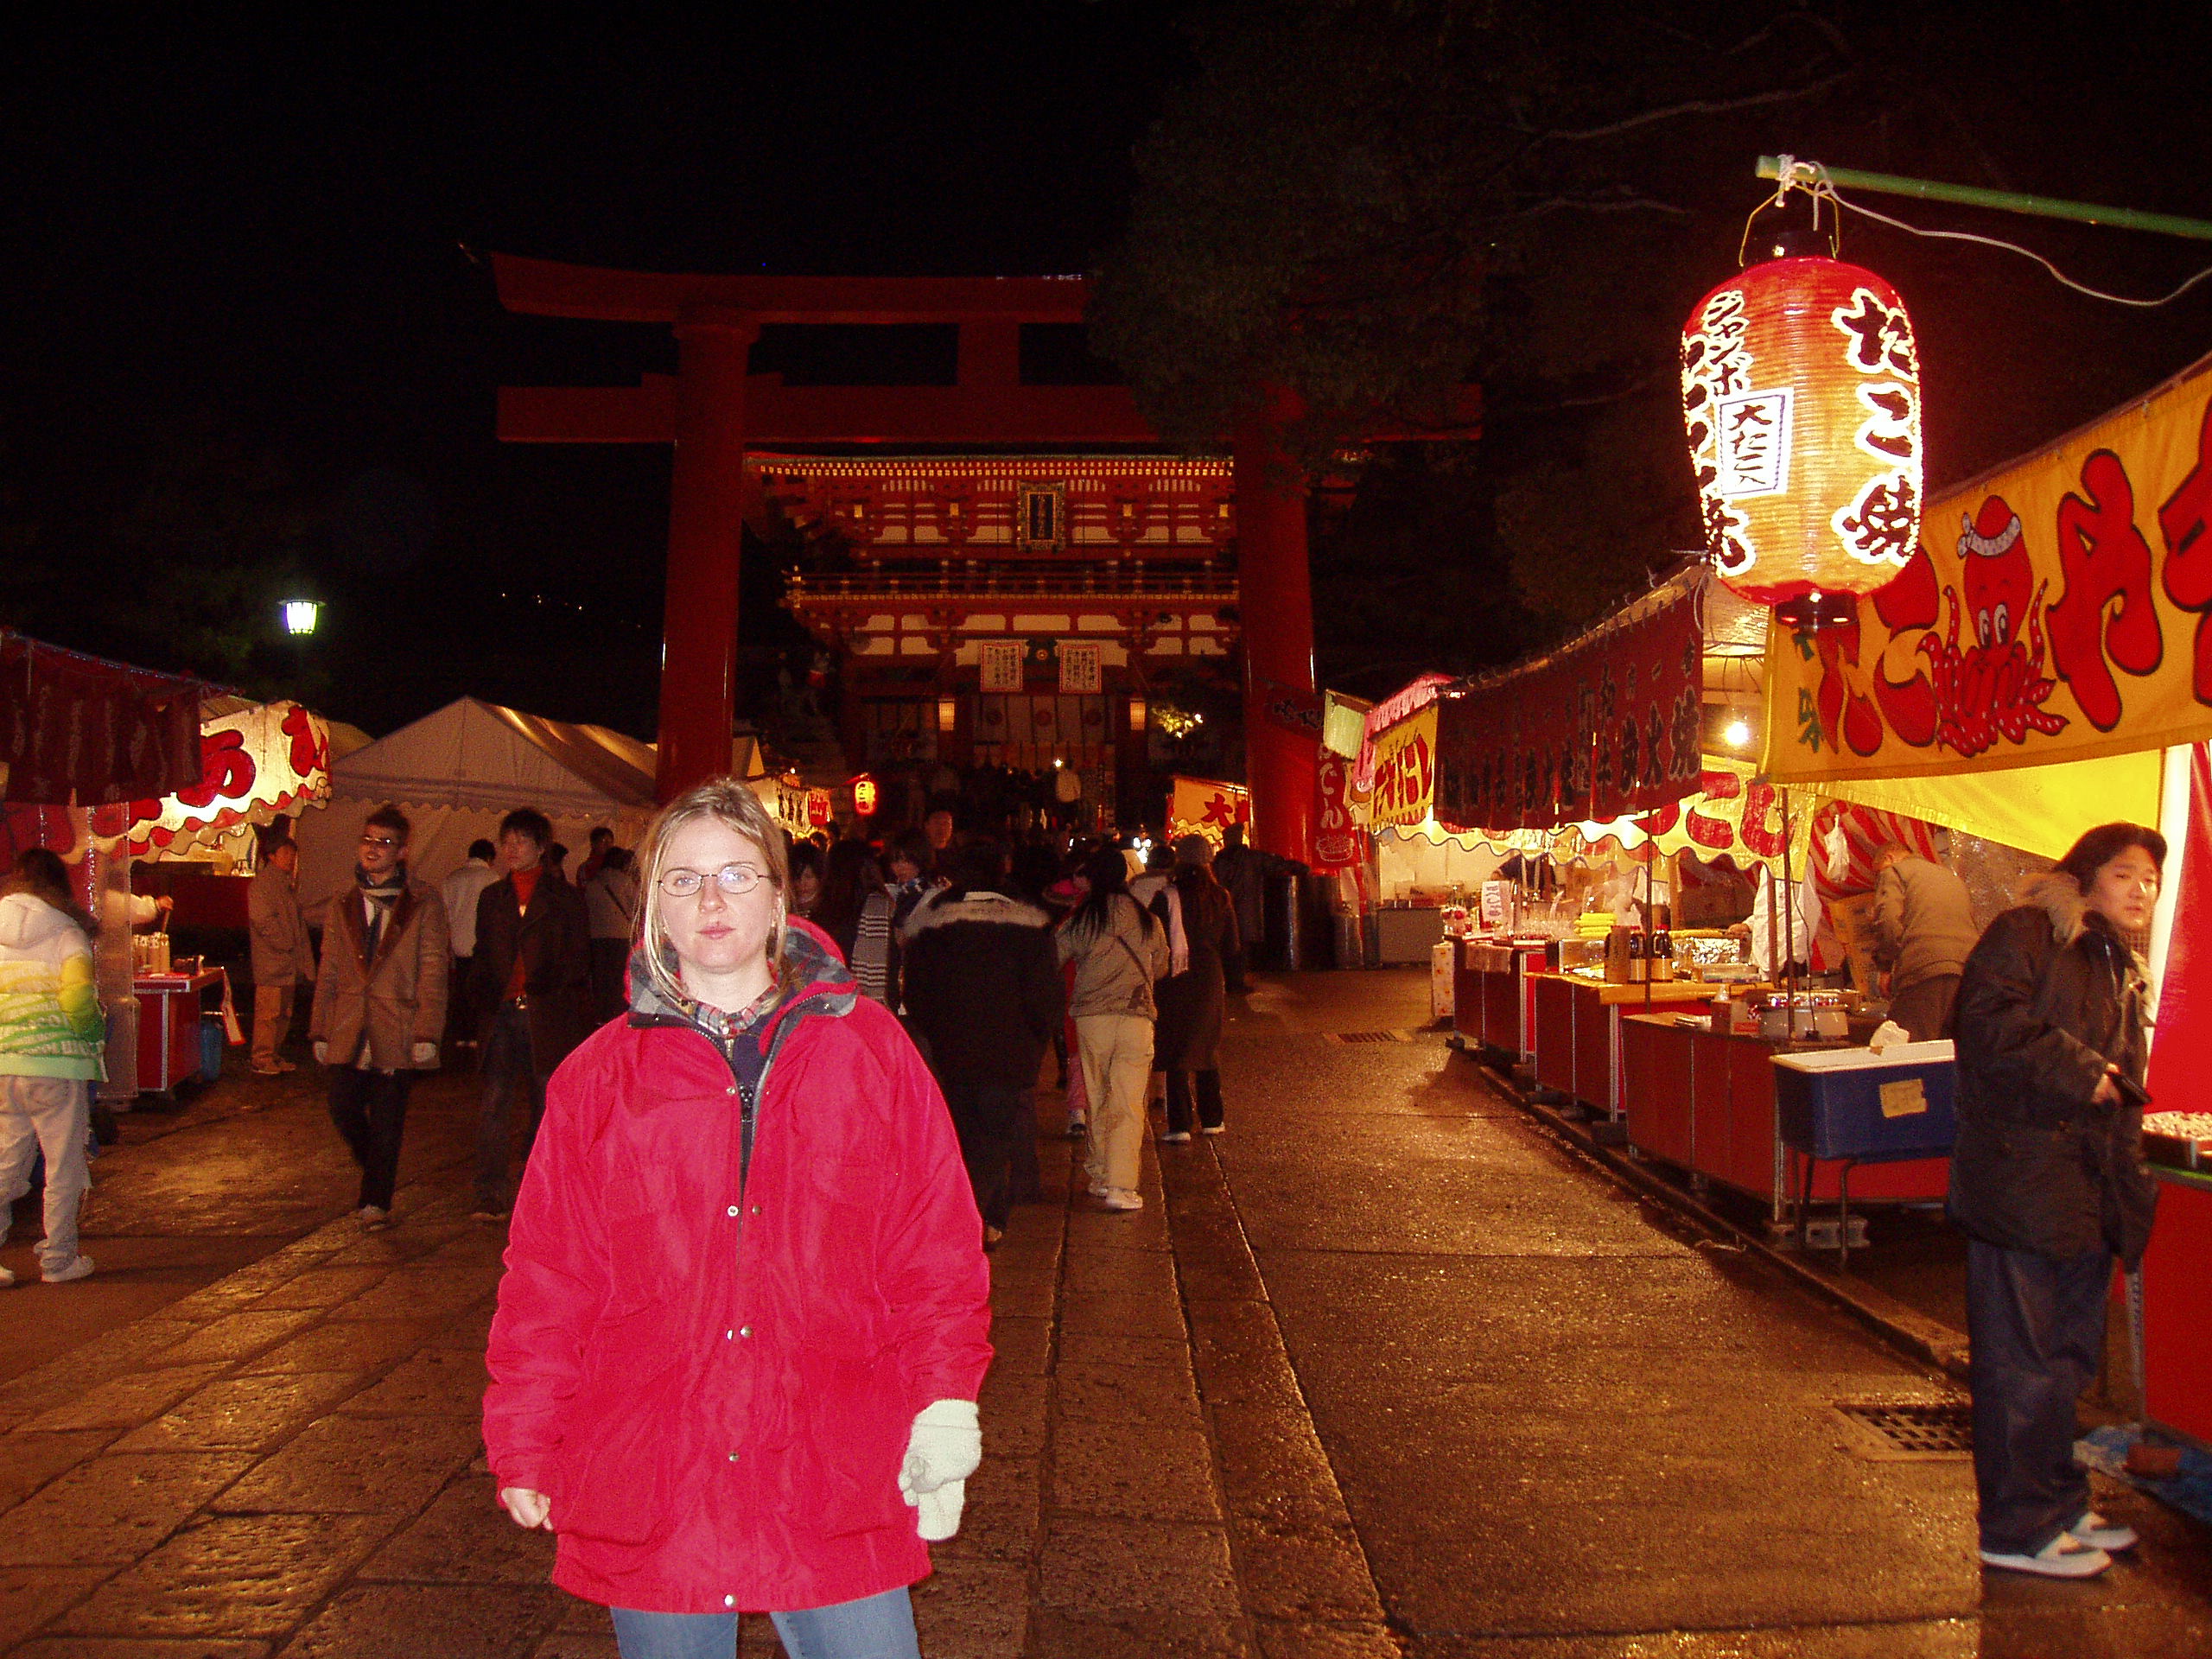 Celebrating New Year in Kyoto (Winter 2004-2005)